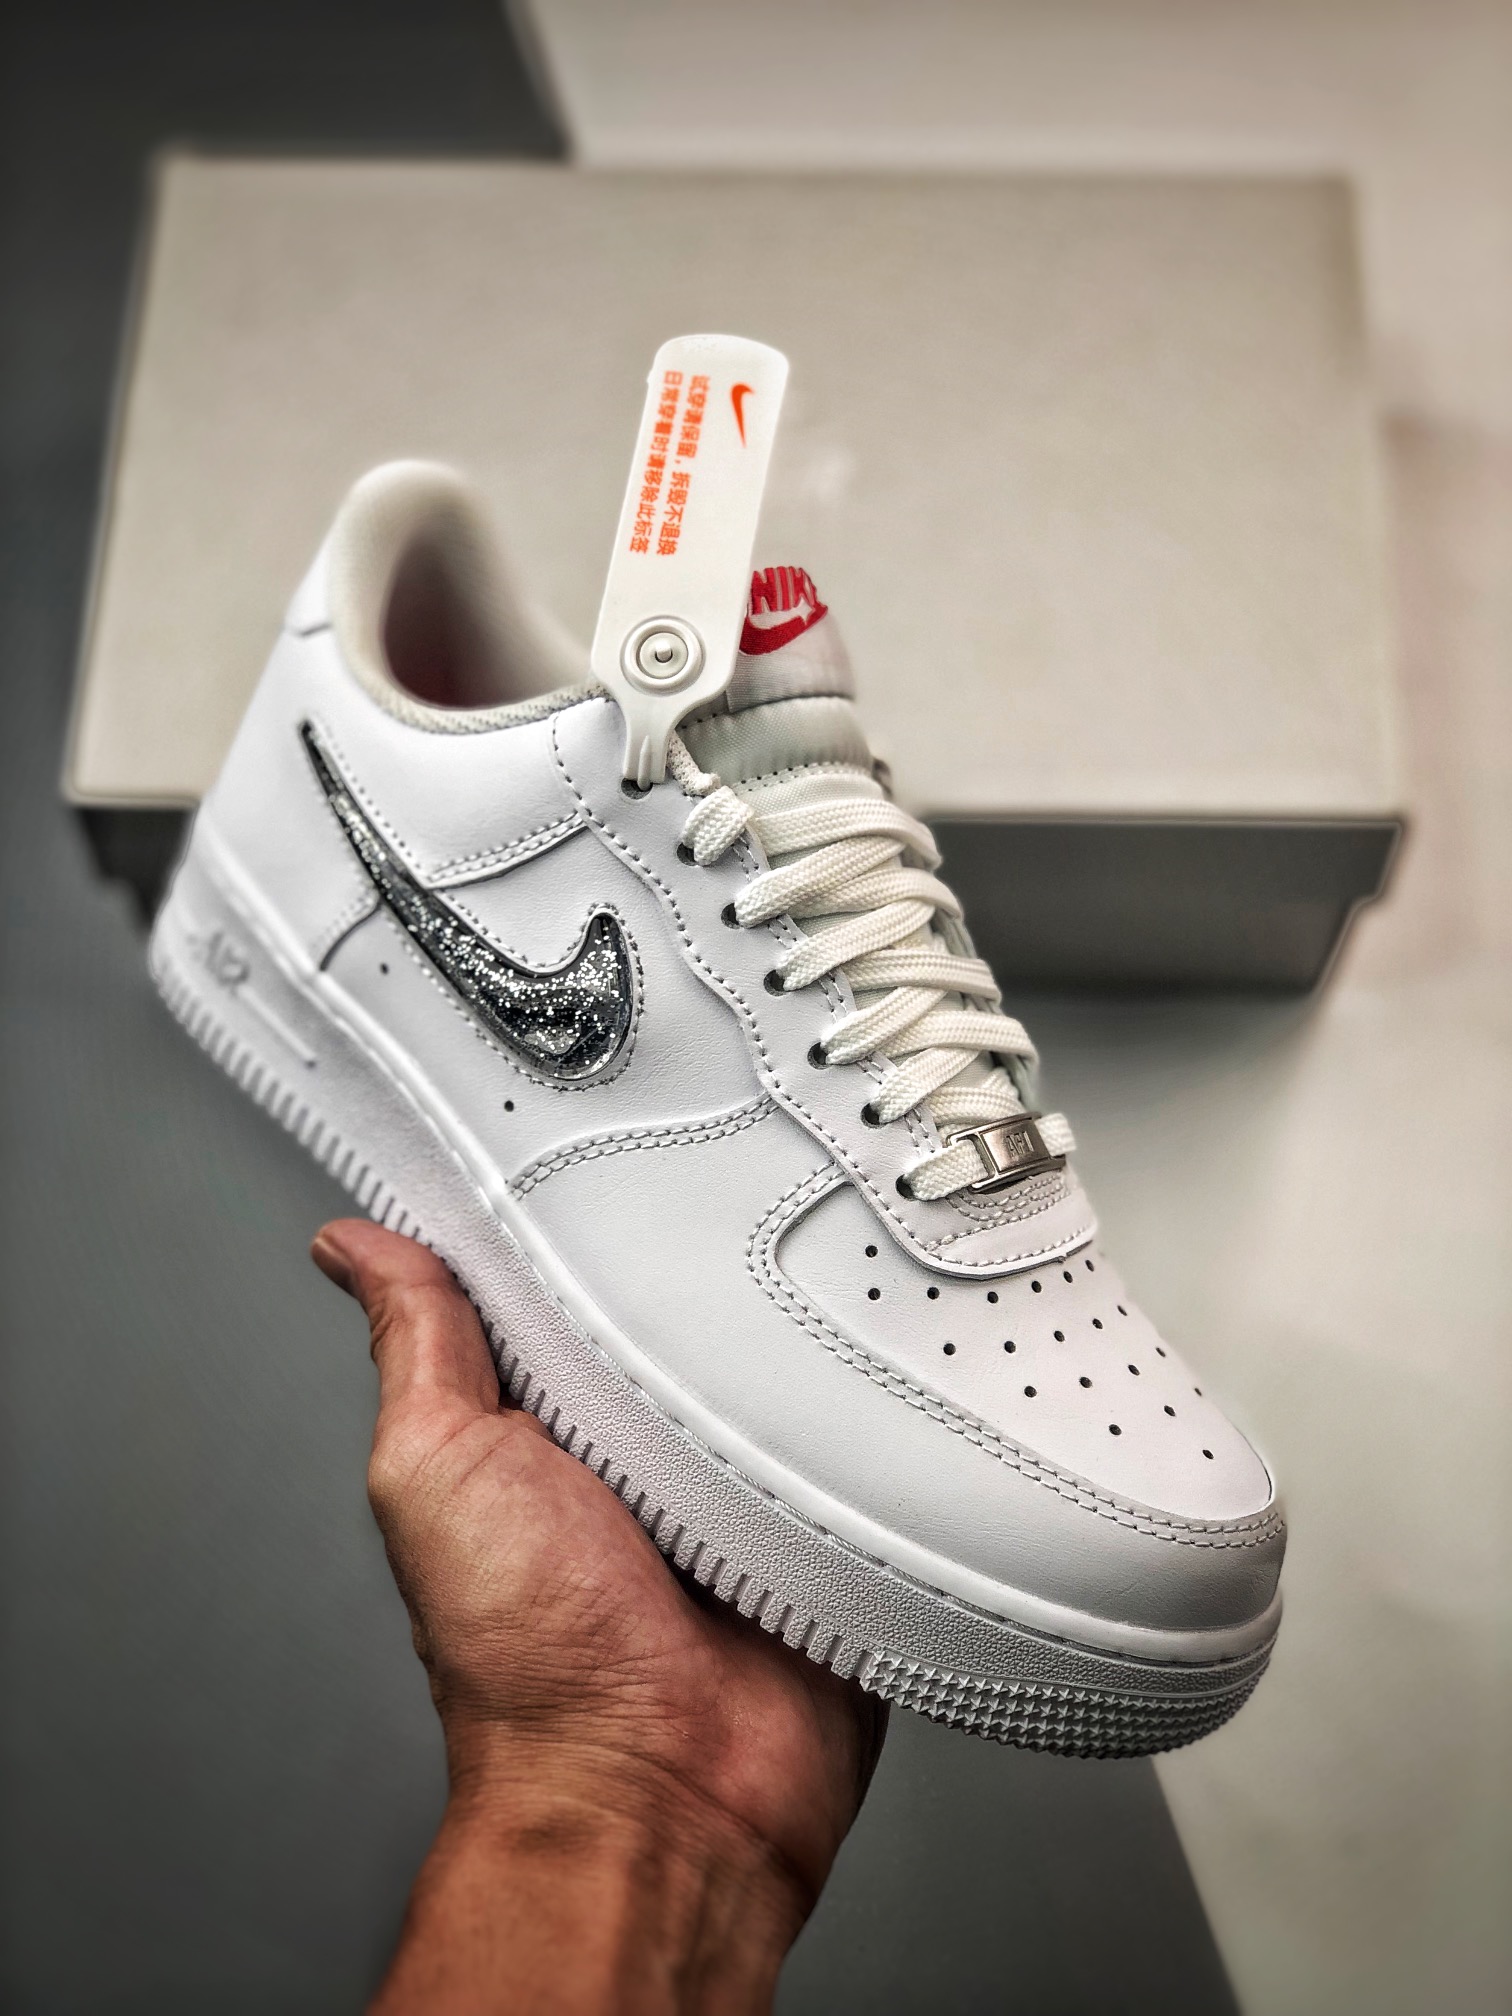 Nike Air AF Force 1 Low LV8 White Metallic Silver Shoes